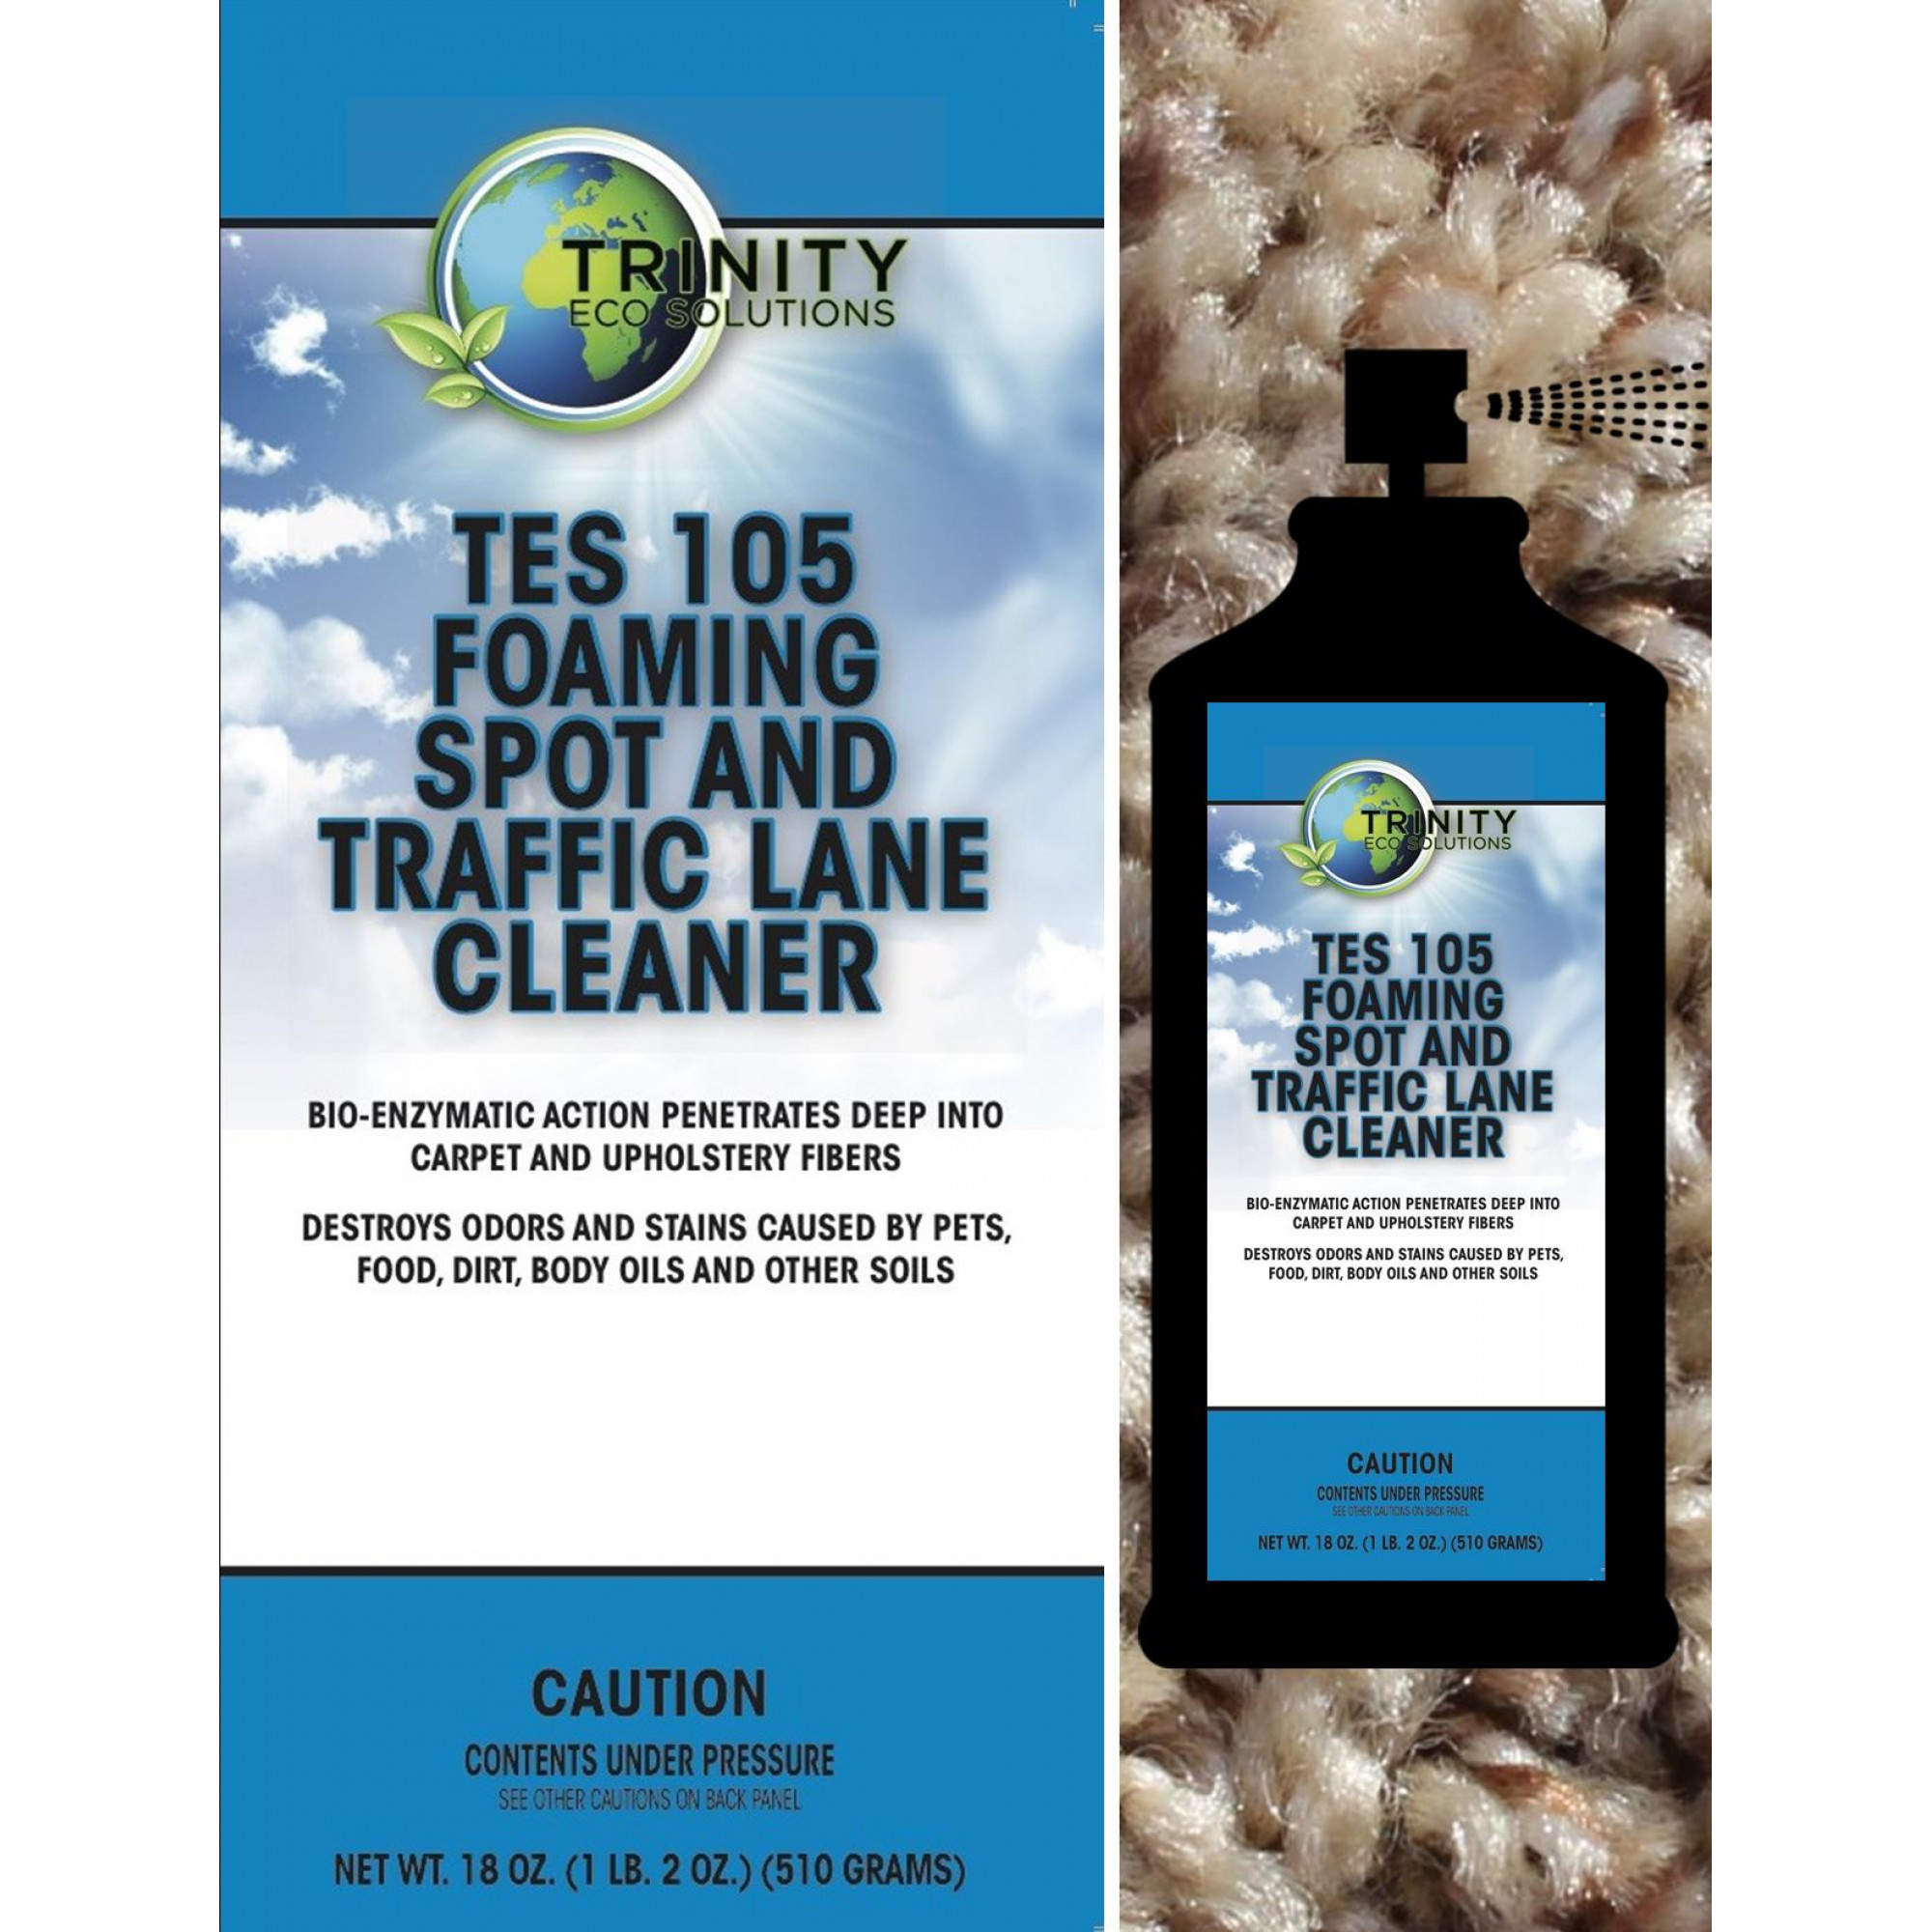 TES 105 Foaming Spot and Traffic Lane Cleaner